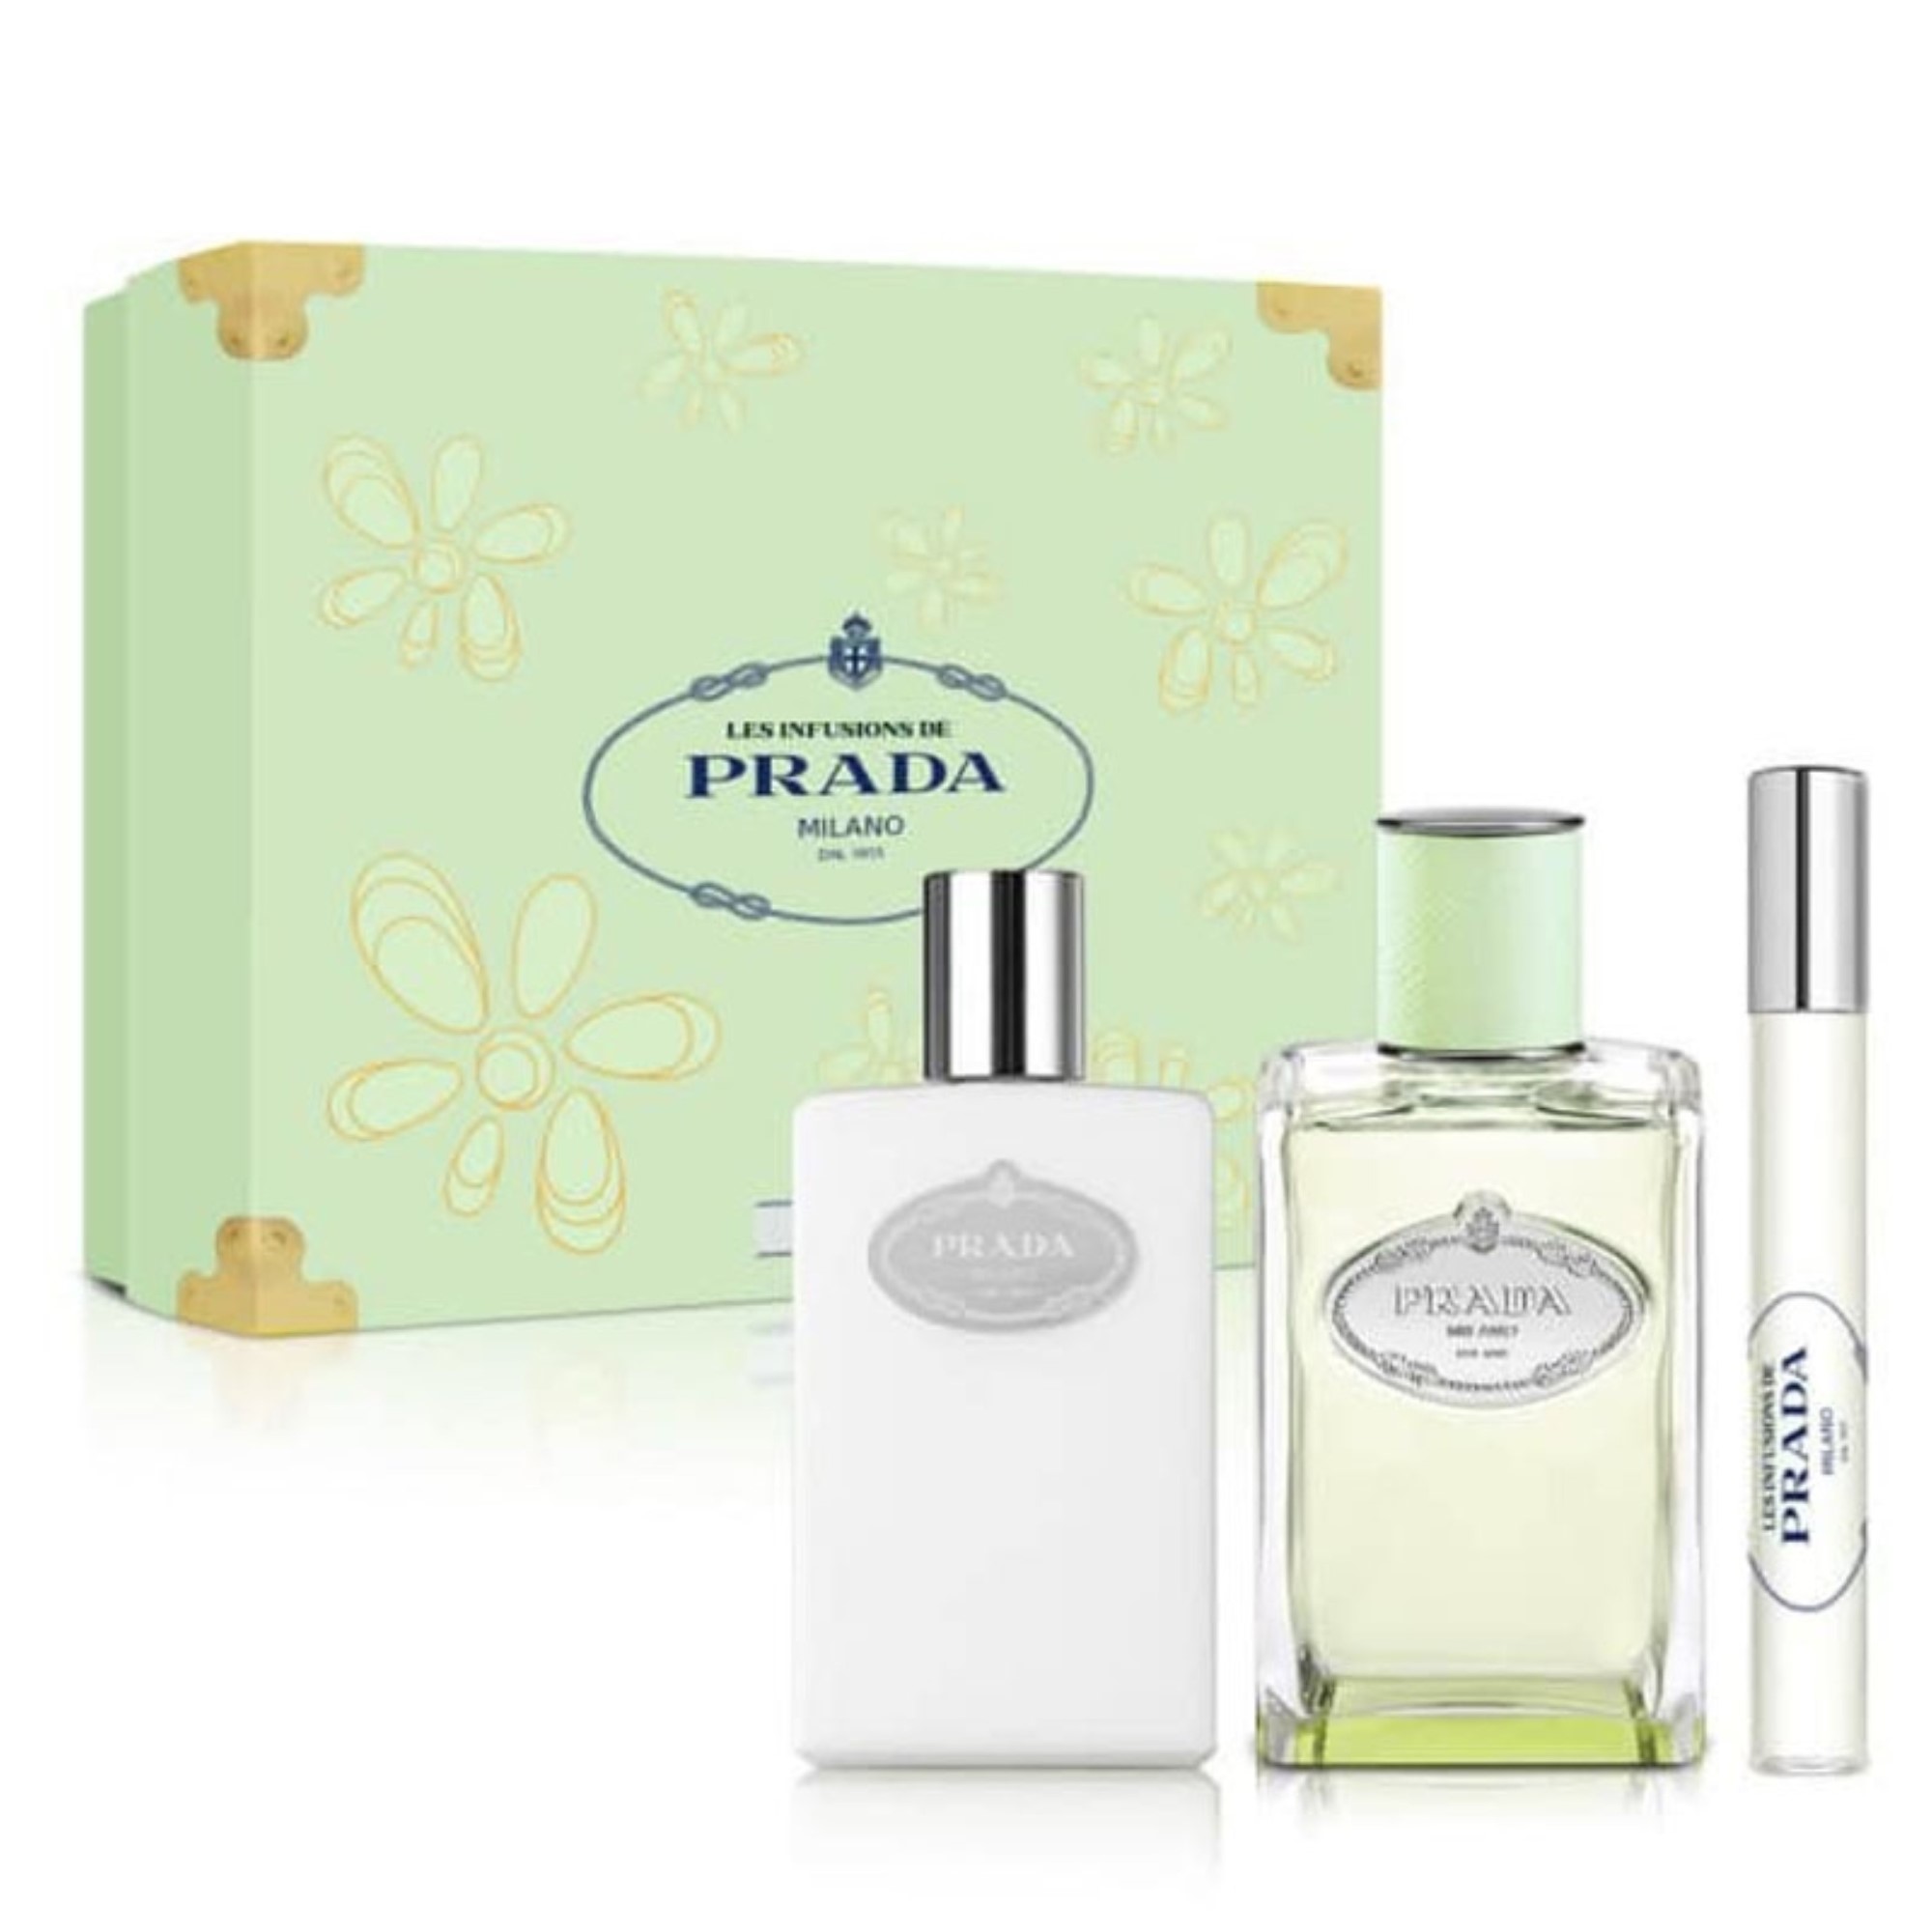 Prada Milano Les Infusions De Iris EDP 100 ml And 10 ml Roll On And 100 ml  Body Lotion Set For Women | Wholesale | Tradeling